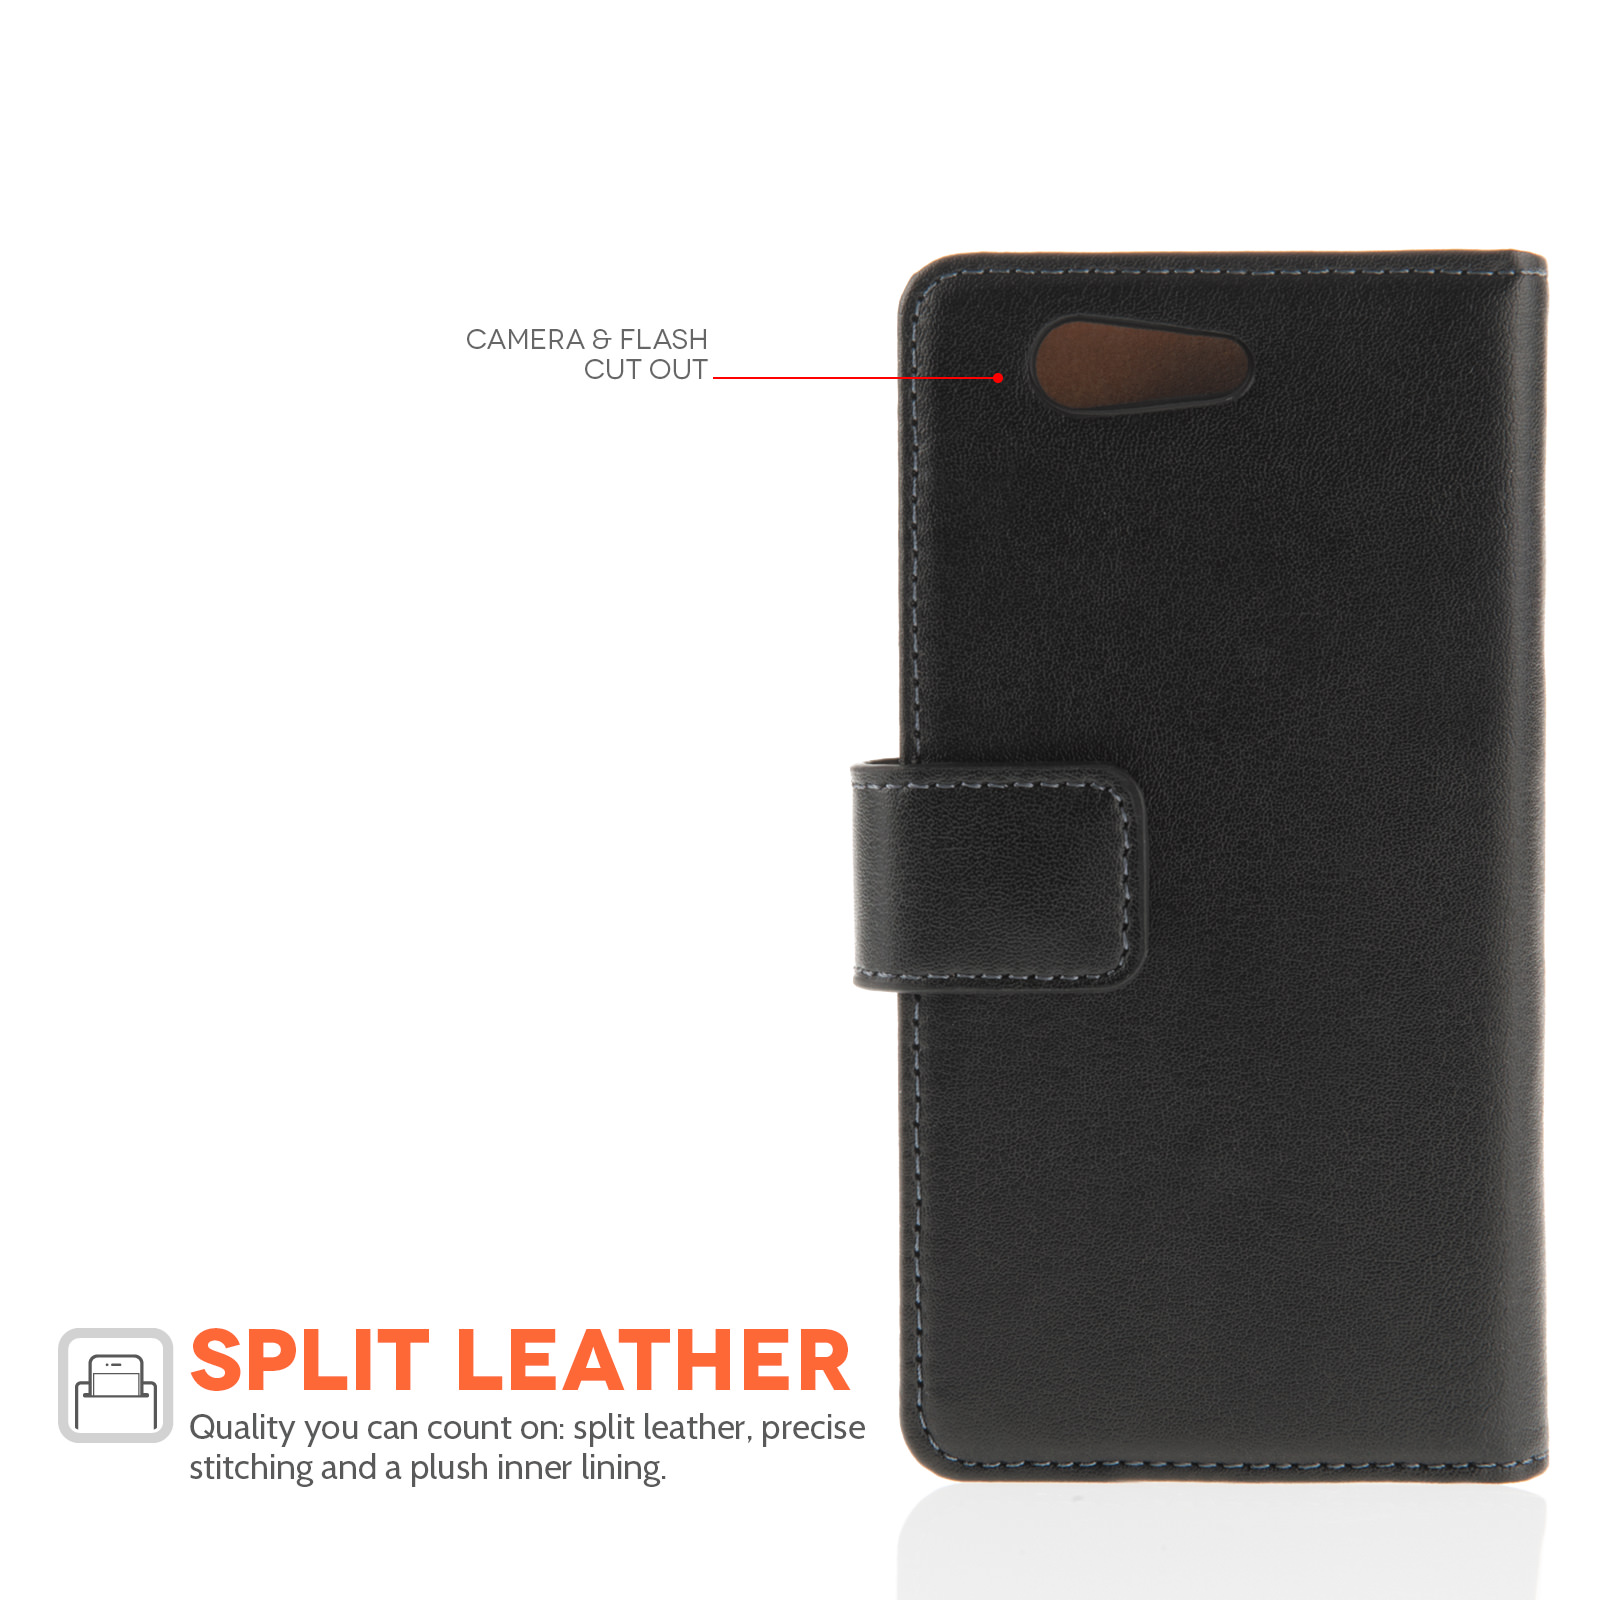 Caseflex Sony Xperia Z4 Compact Real Leather Wallet Case - Black